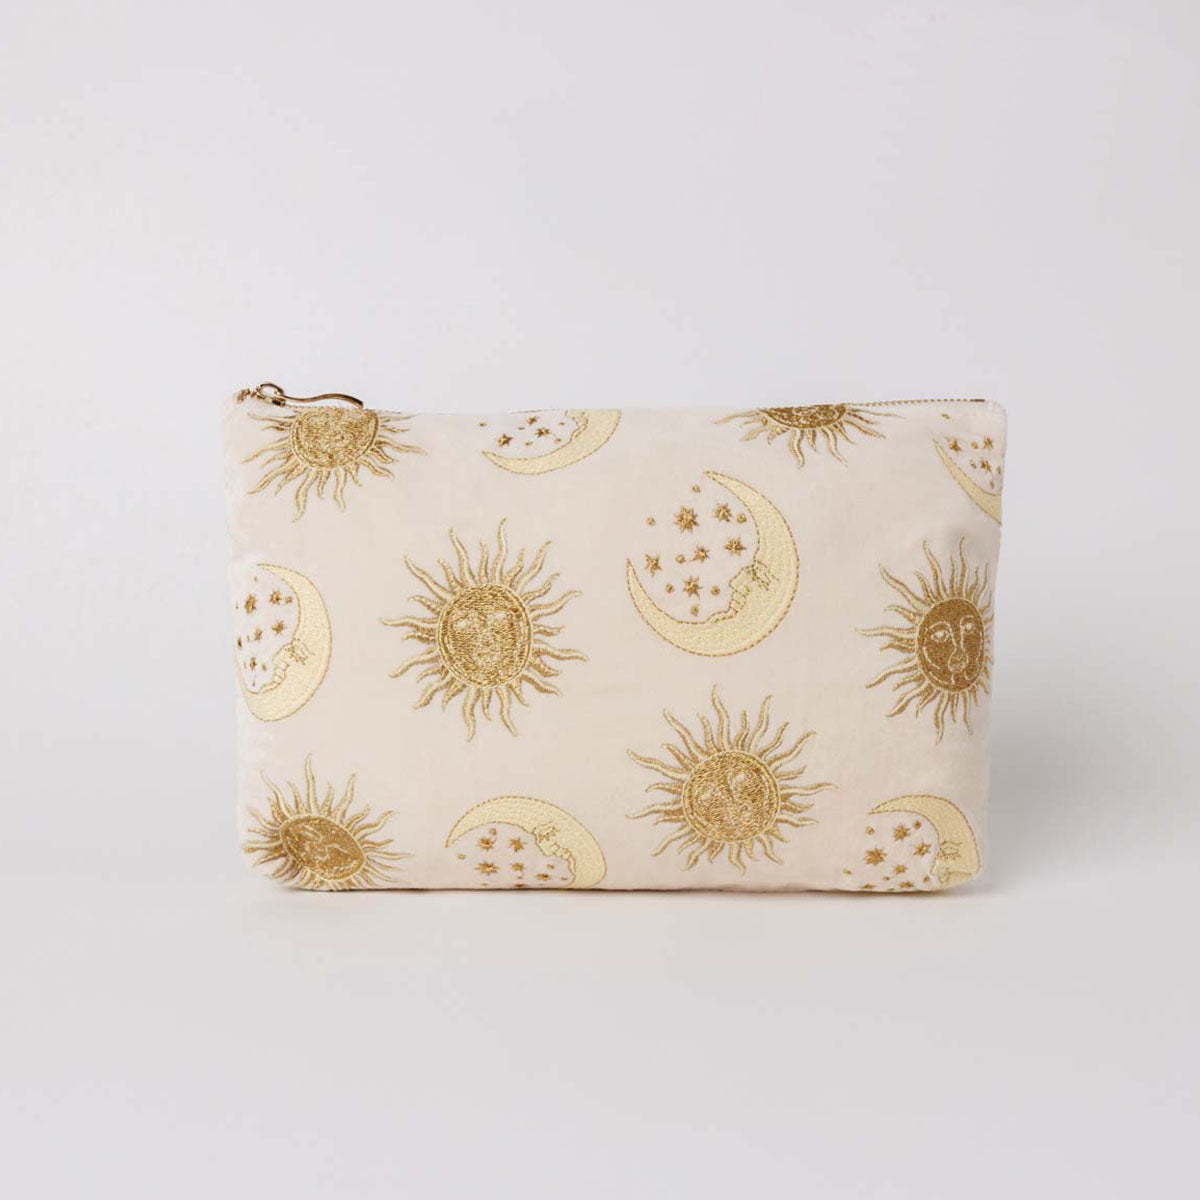 Suns & Moons Everyday Pouch